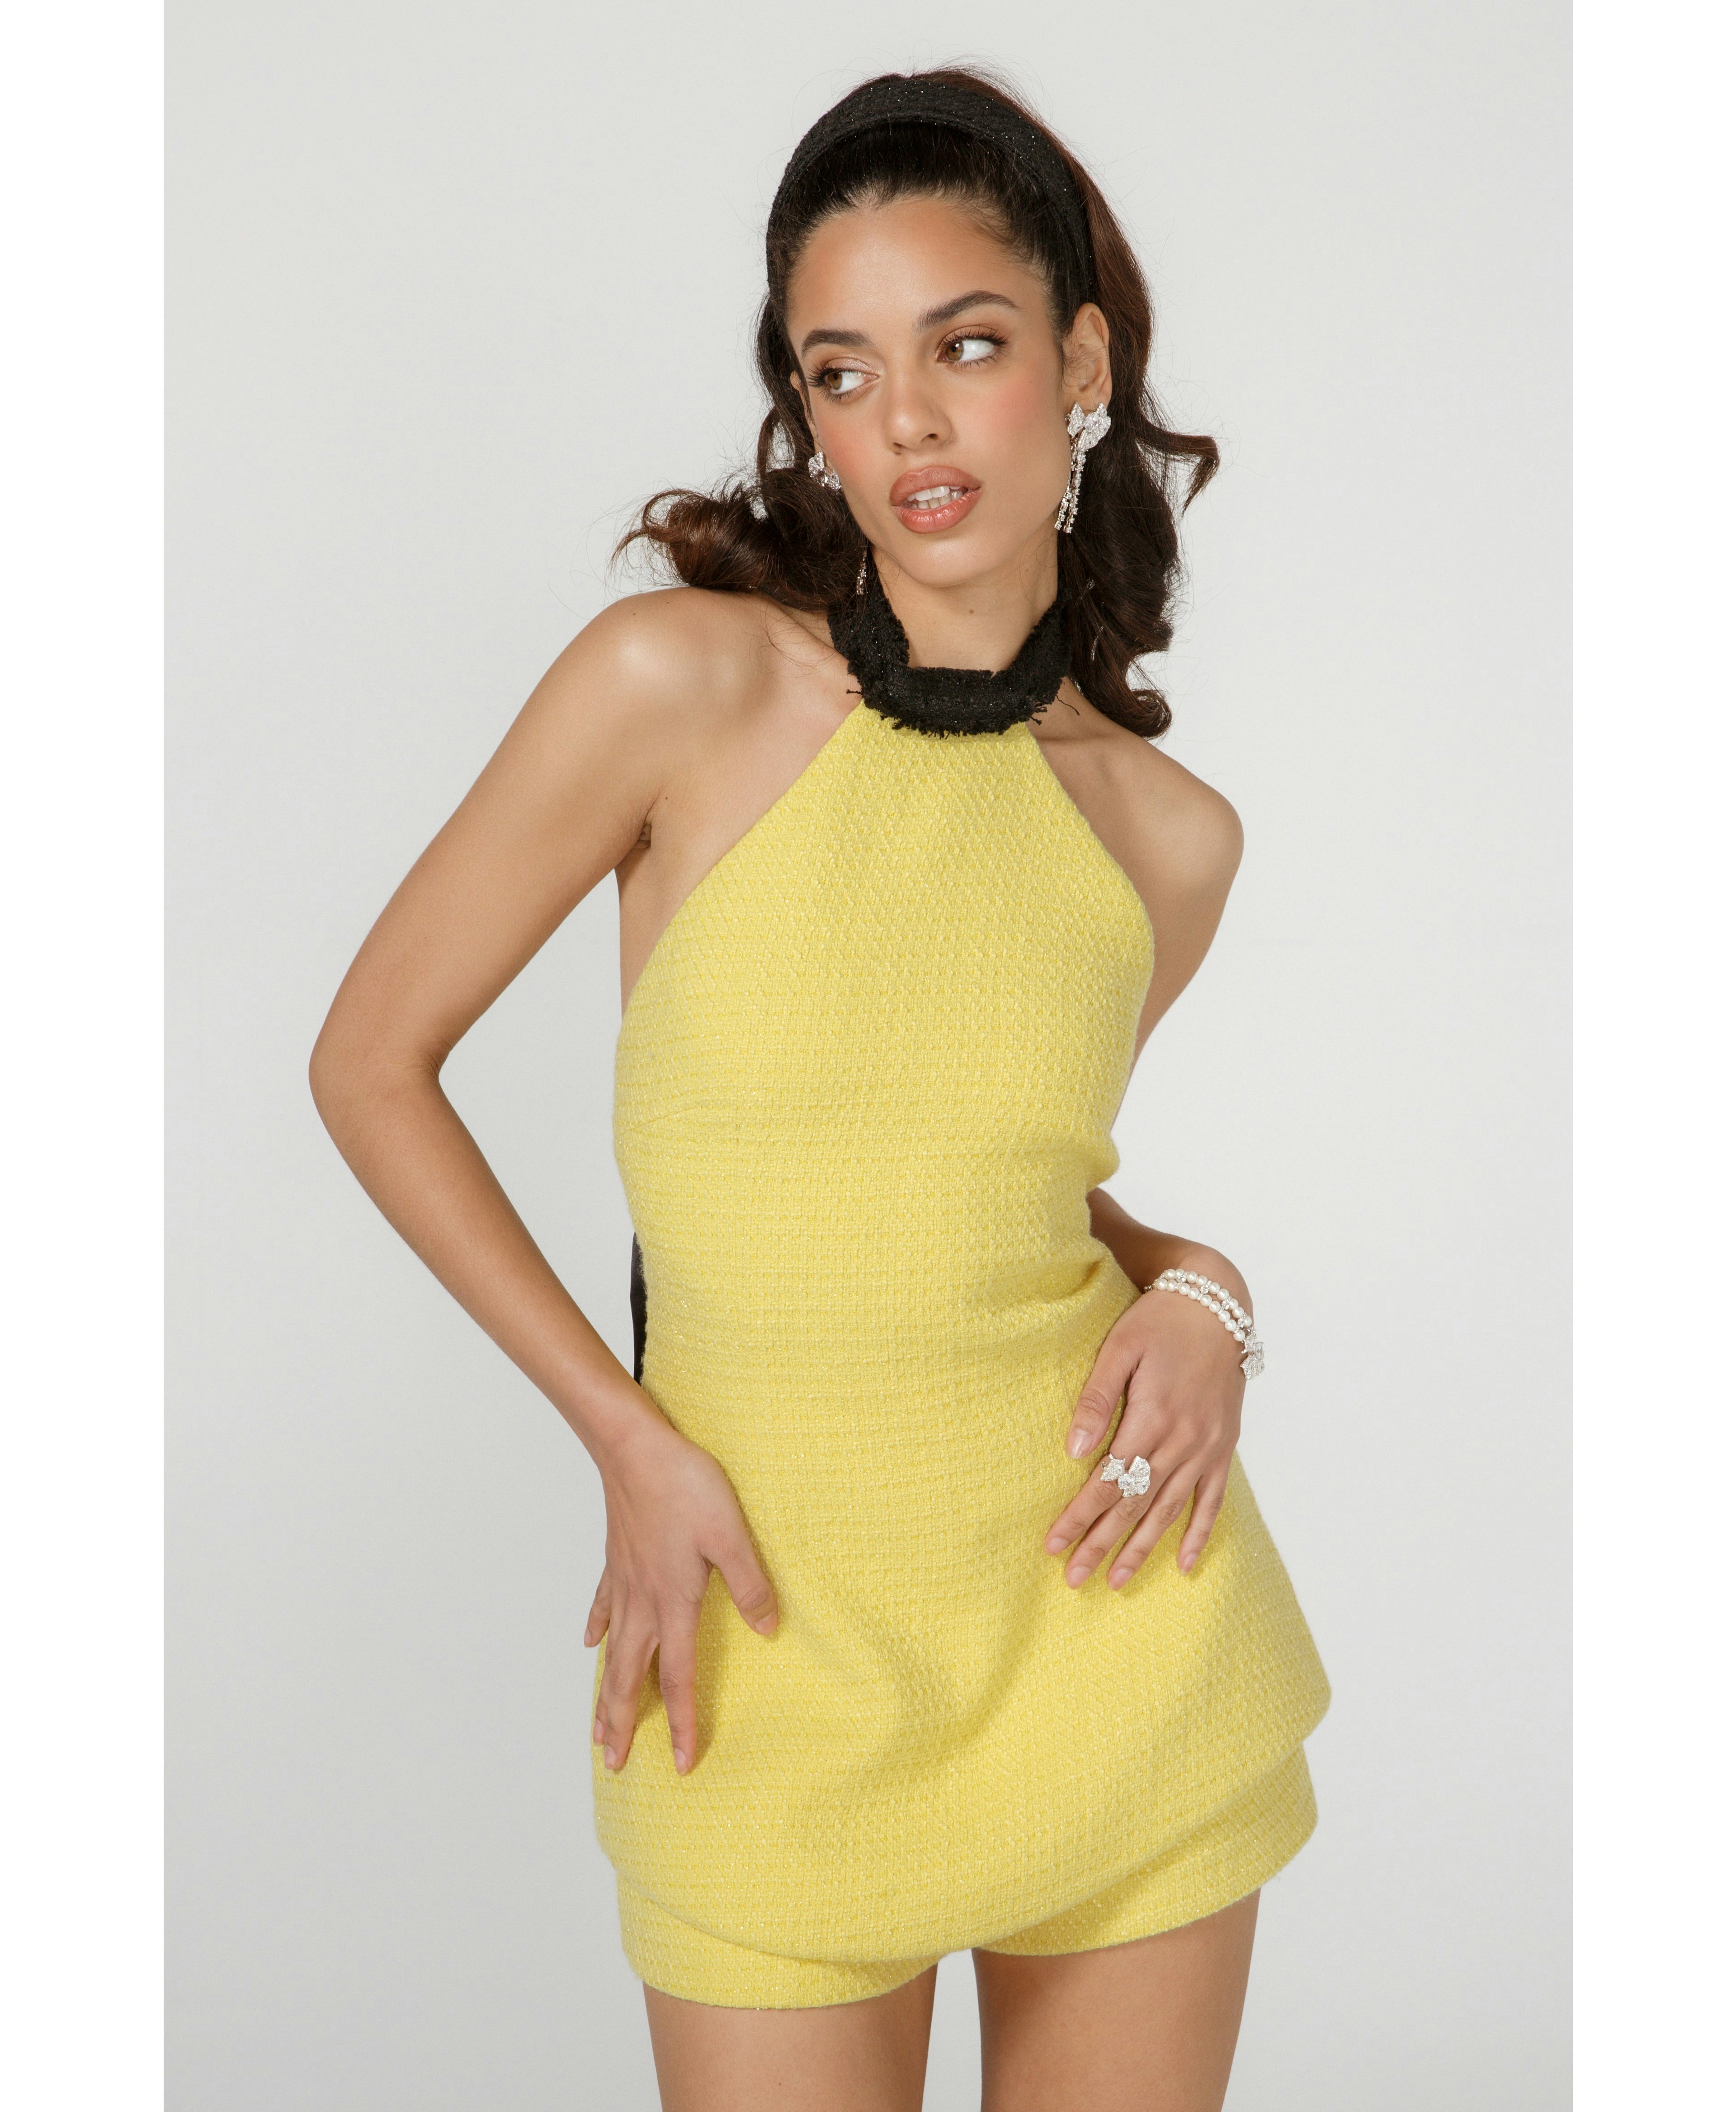 Shop Cecilia Halter Jumpsuit (Yellow) from Nana Jacqueline at Seezona